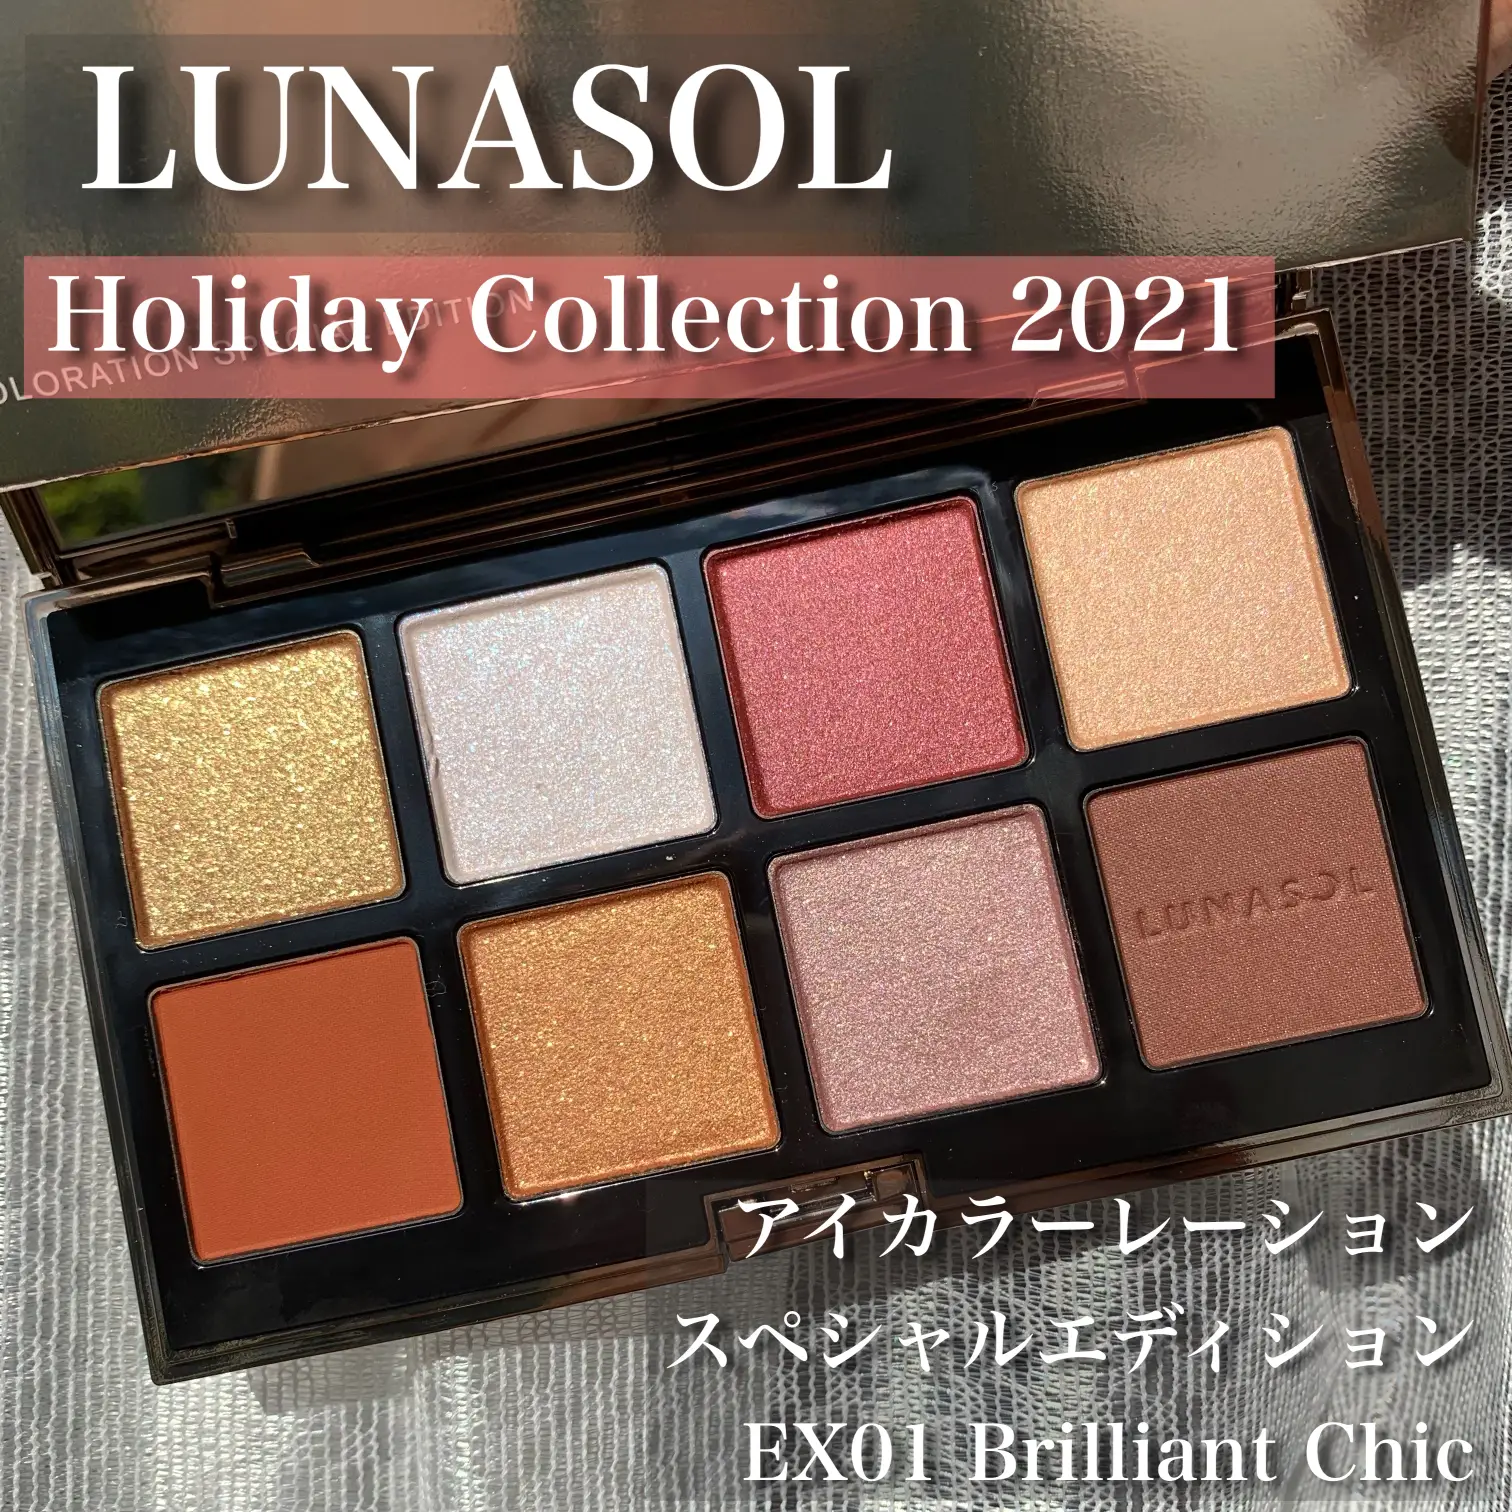 Lunasol Holiday ❄️ Multicolor Palette Swatch | Gallery posted by